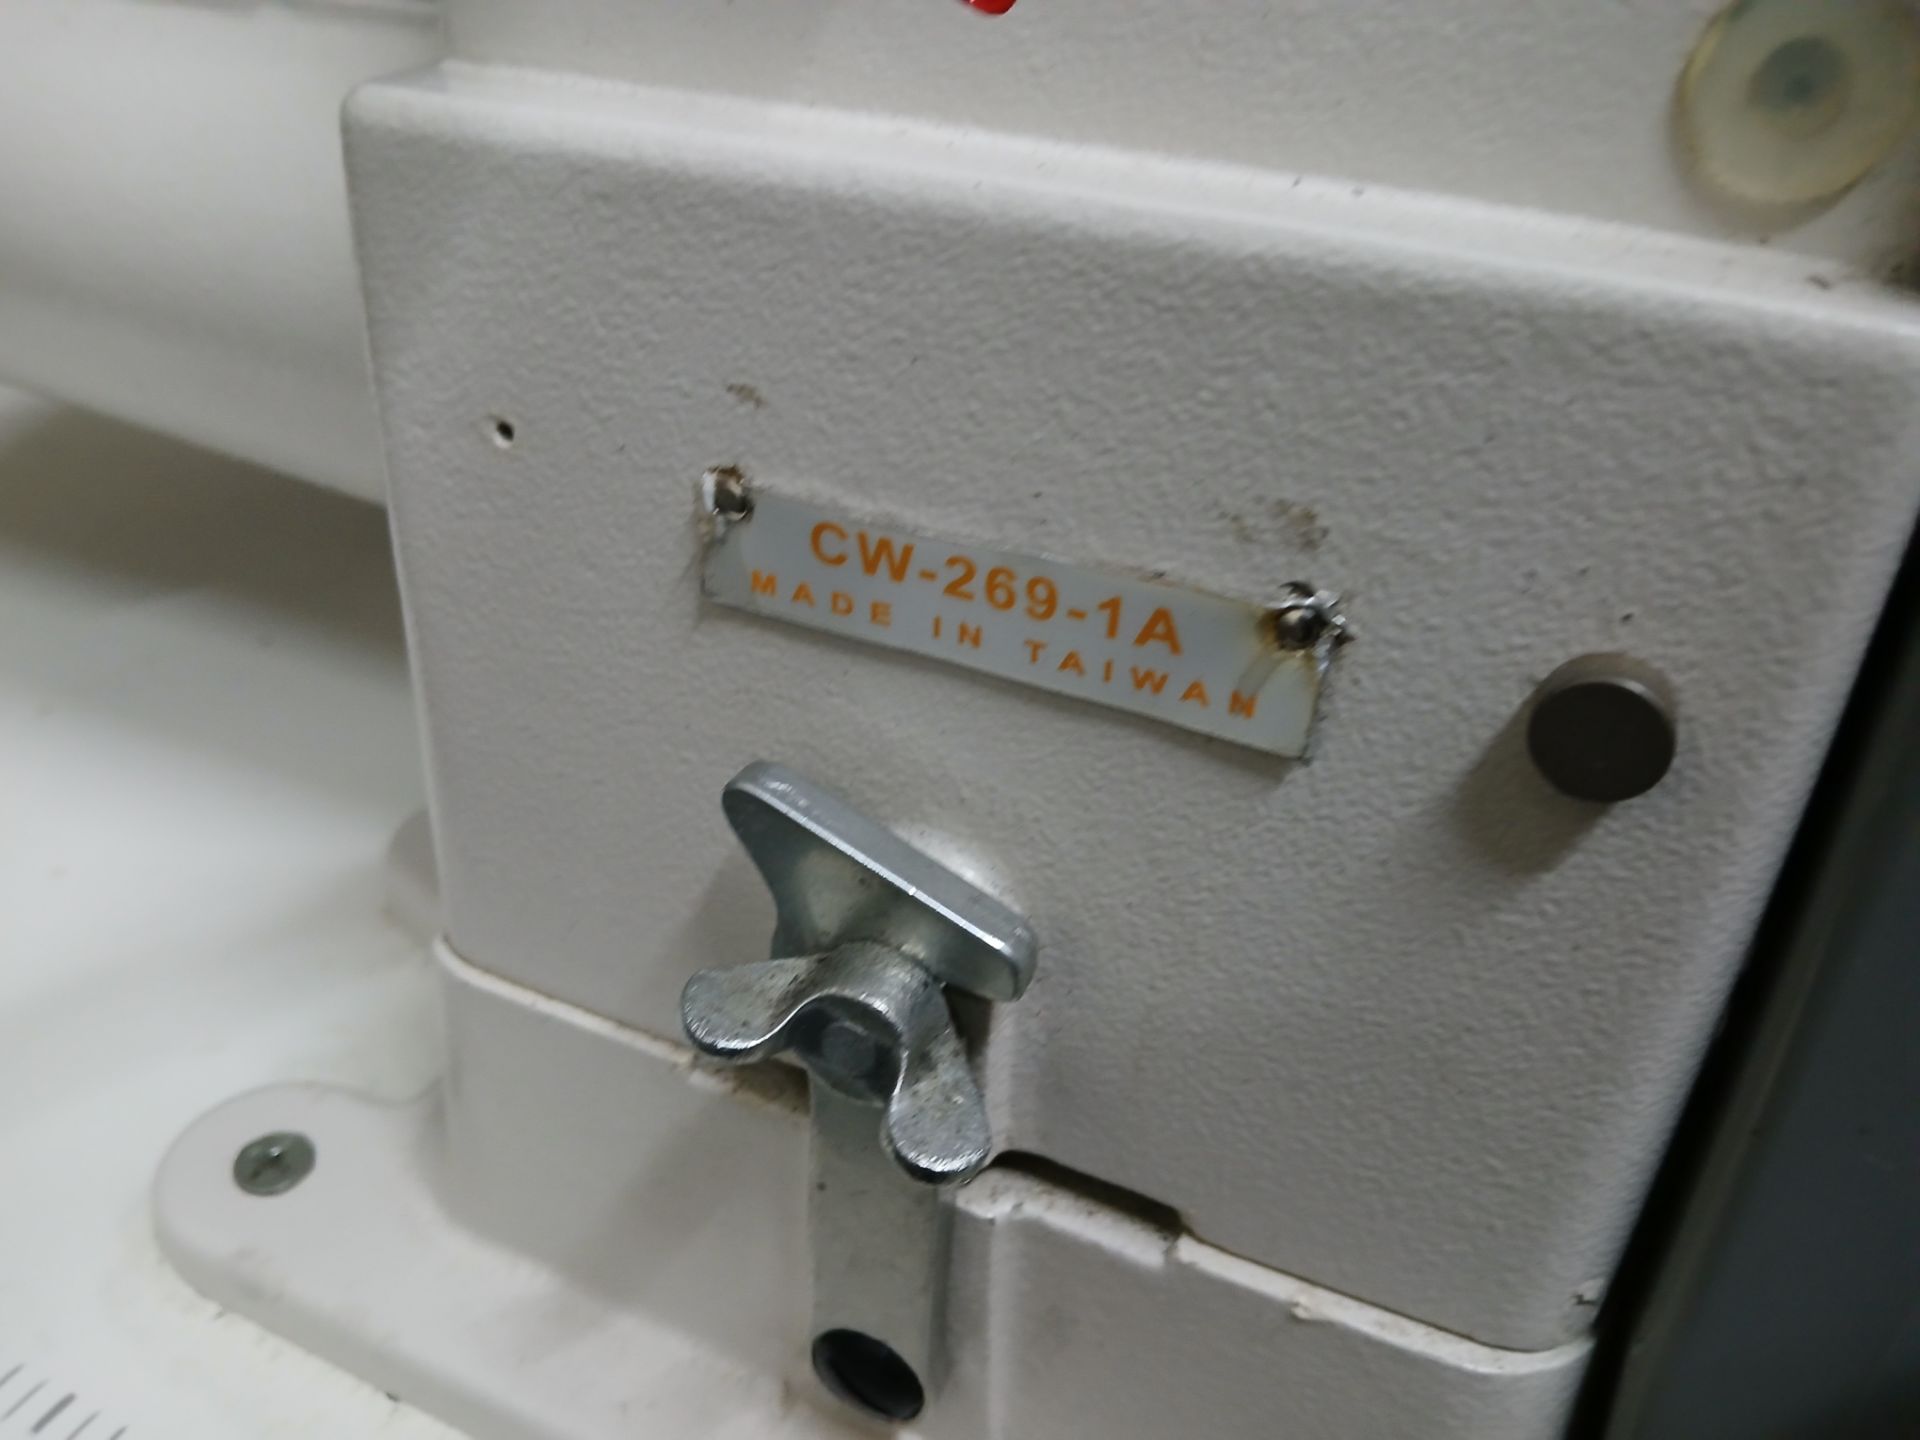 Falcon CW-269-1A walking foot cylinder arm industrial sewing machine – not in use but understood - Image 3 of 4